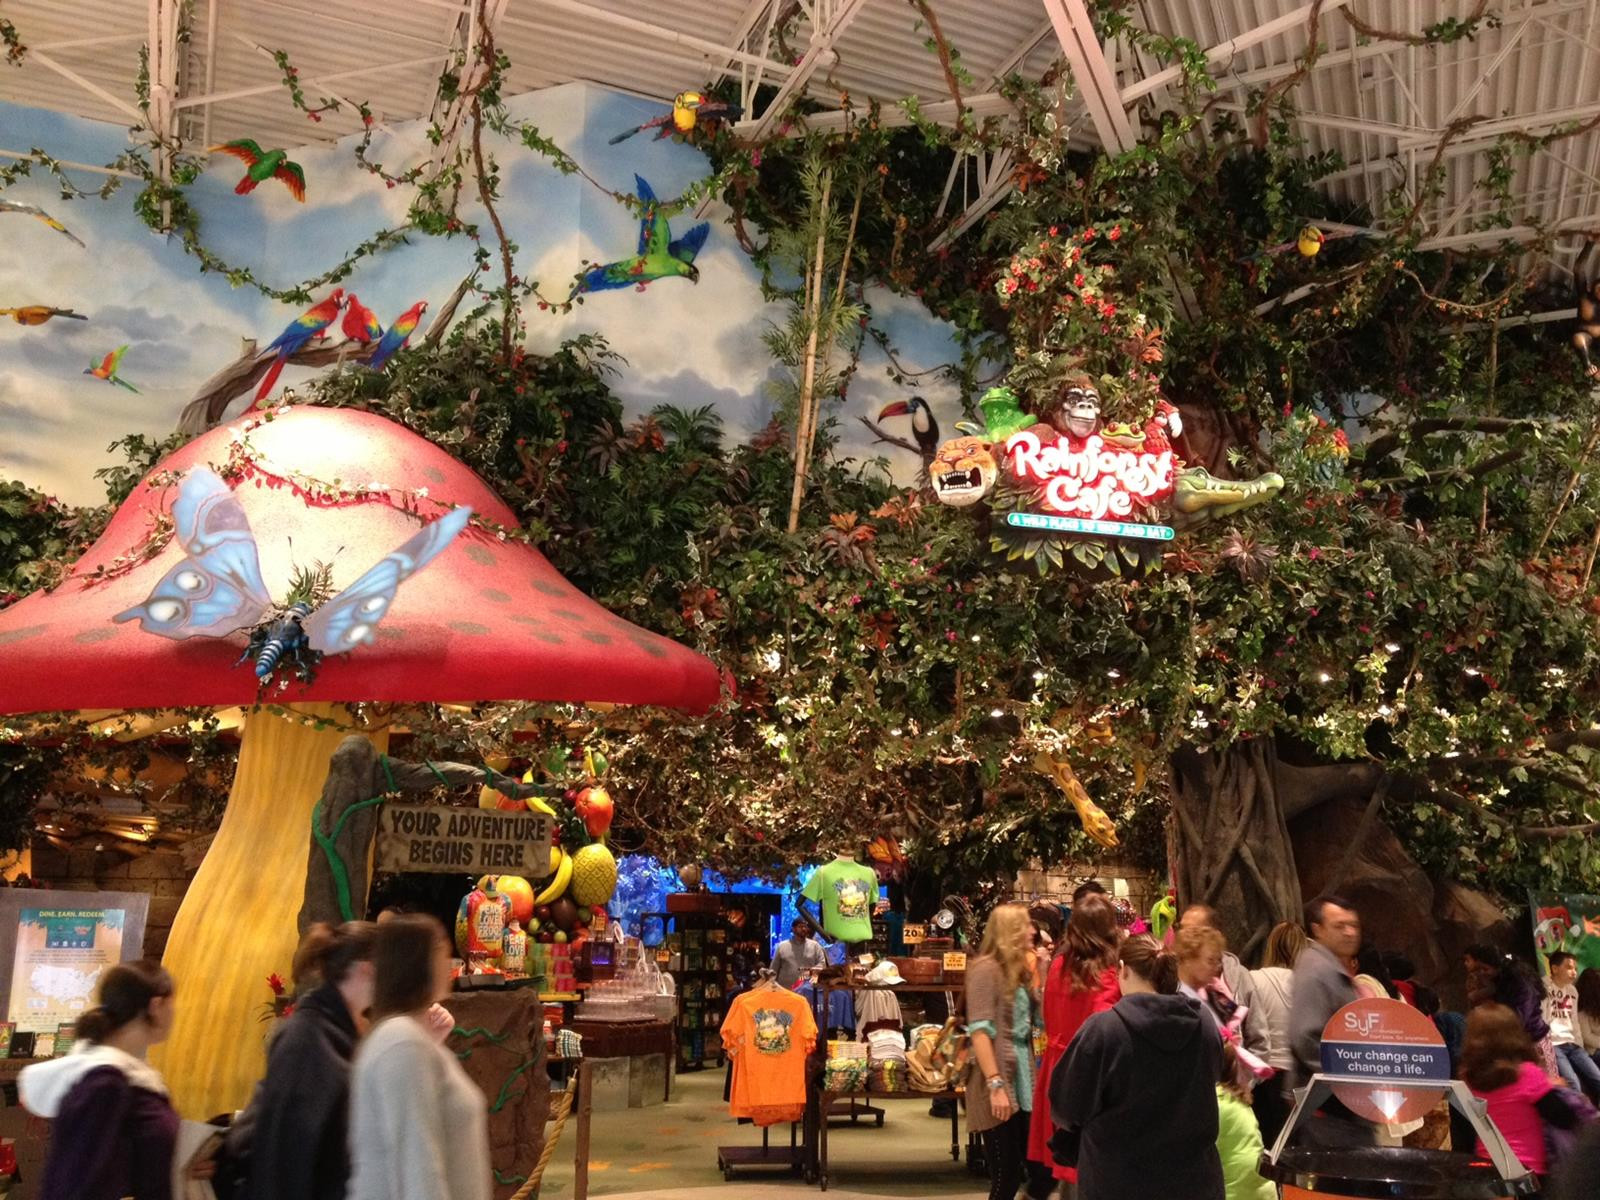 The Best Rainforest Cafe Desserts Menu - Best Recipes Ideas and Collections